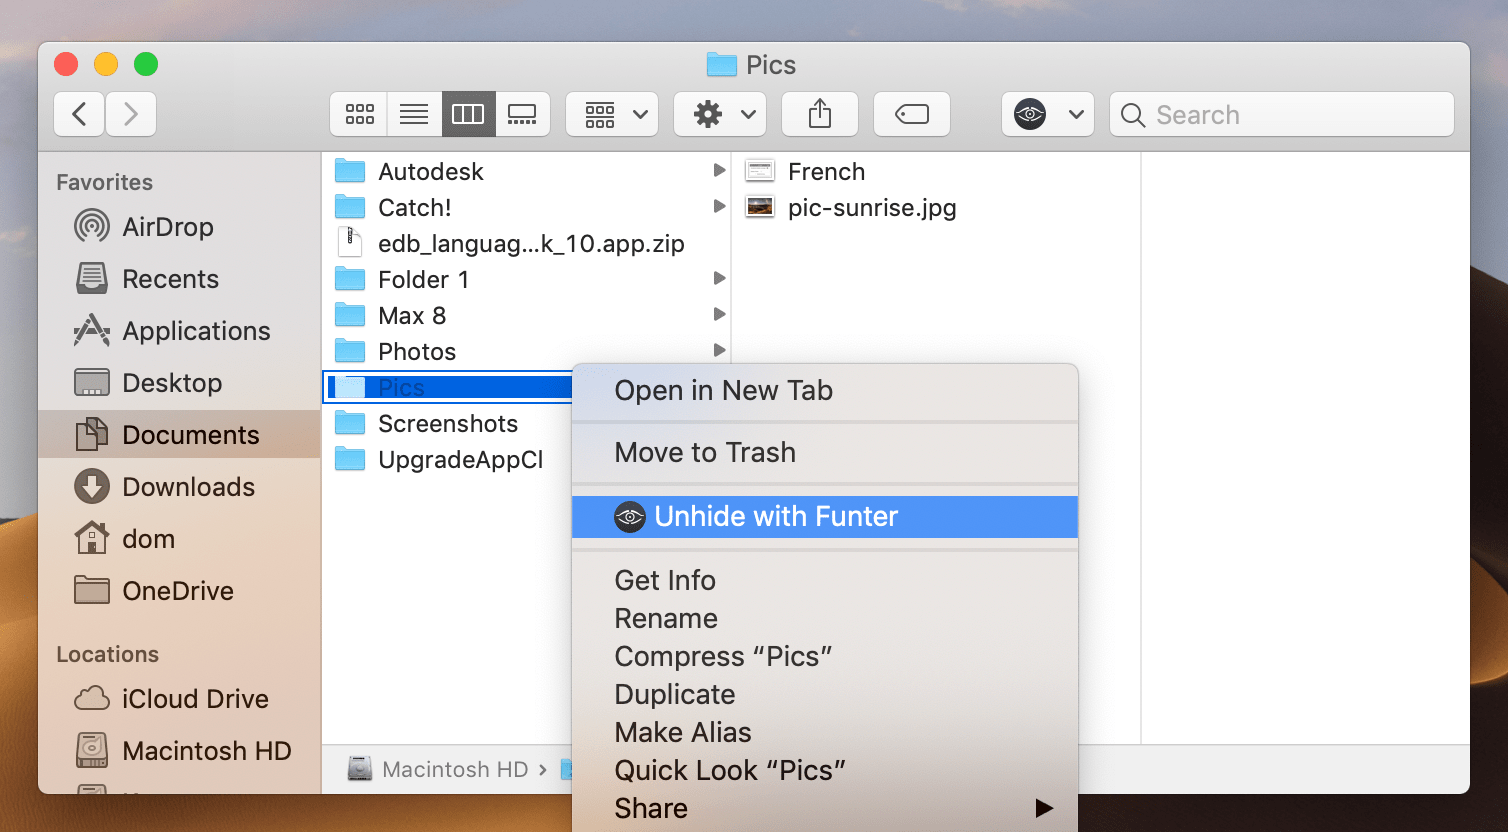 Unhide with Funter context menu command selected for folder